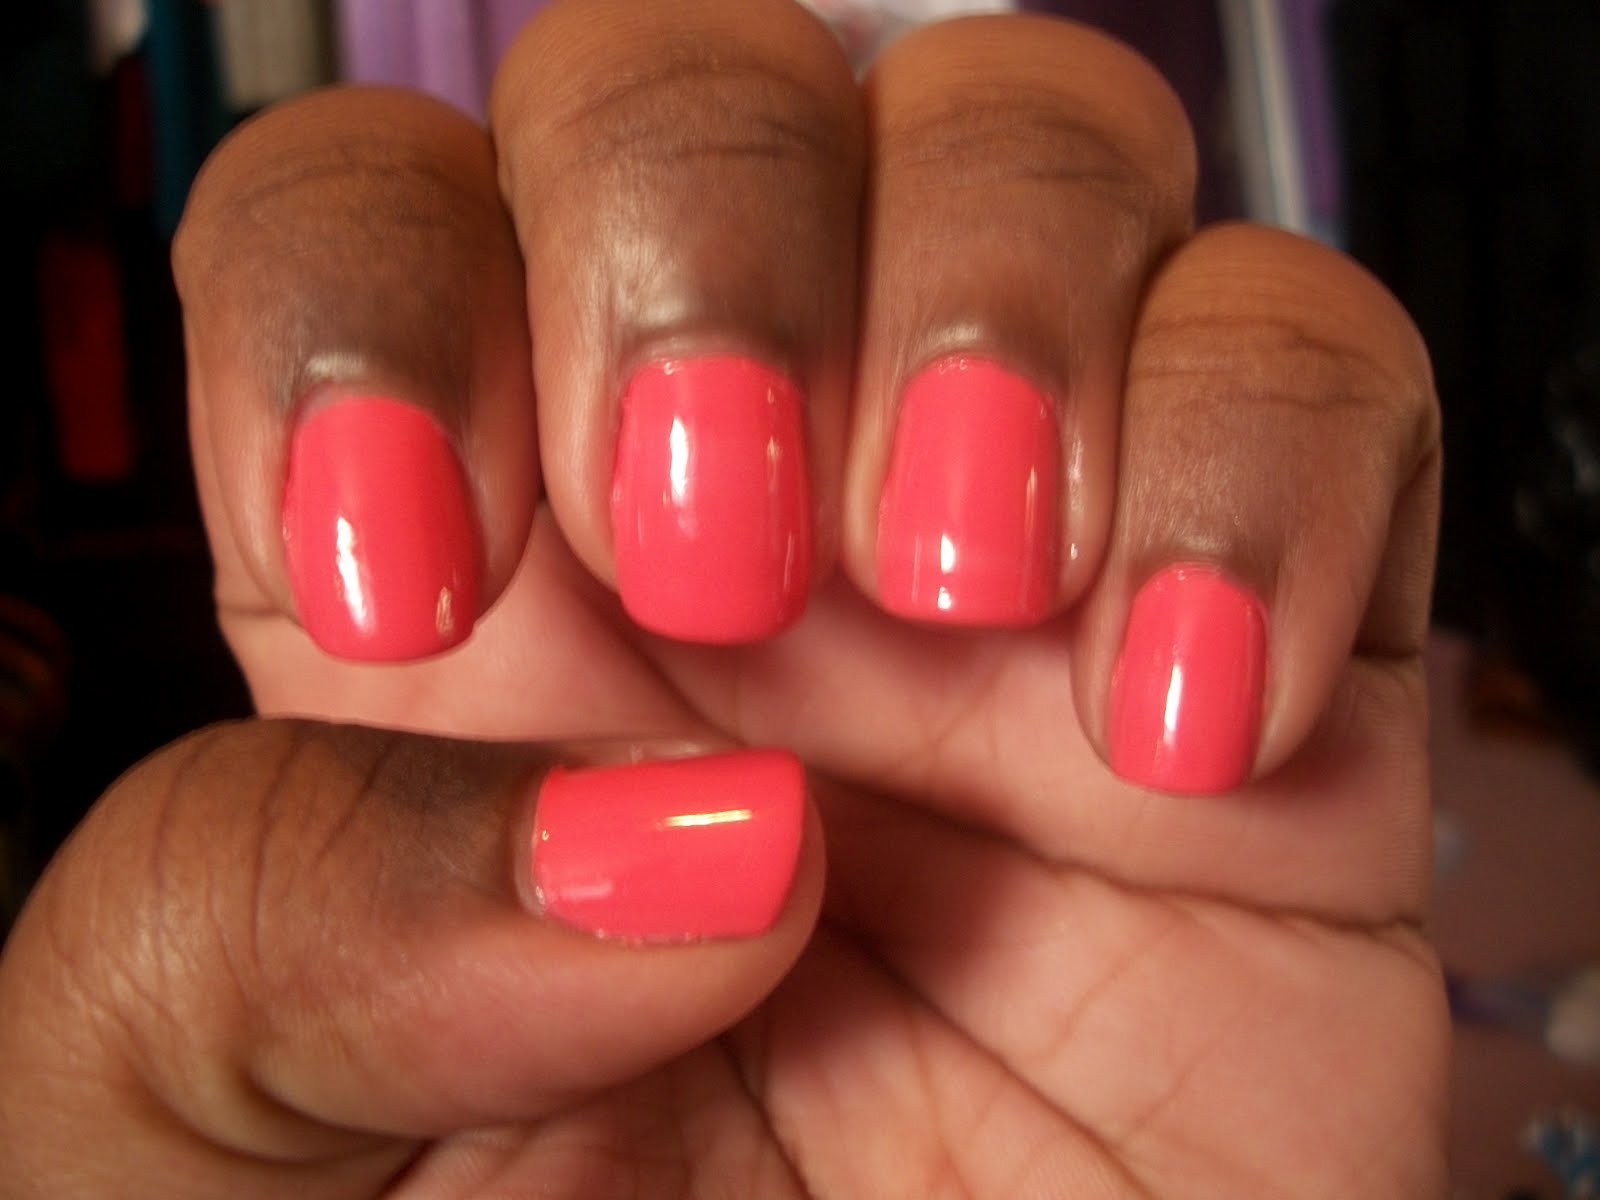 2. Essie Nail Polish in "Coral Reef" - wide 3